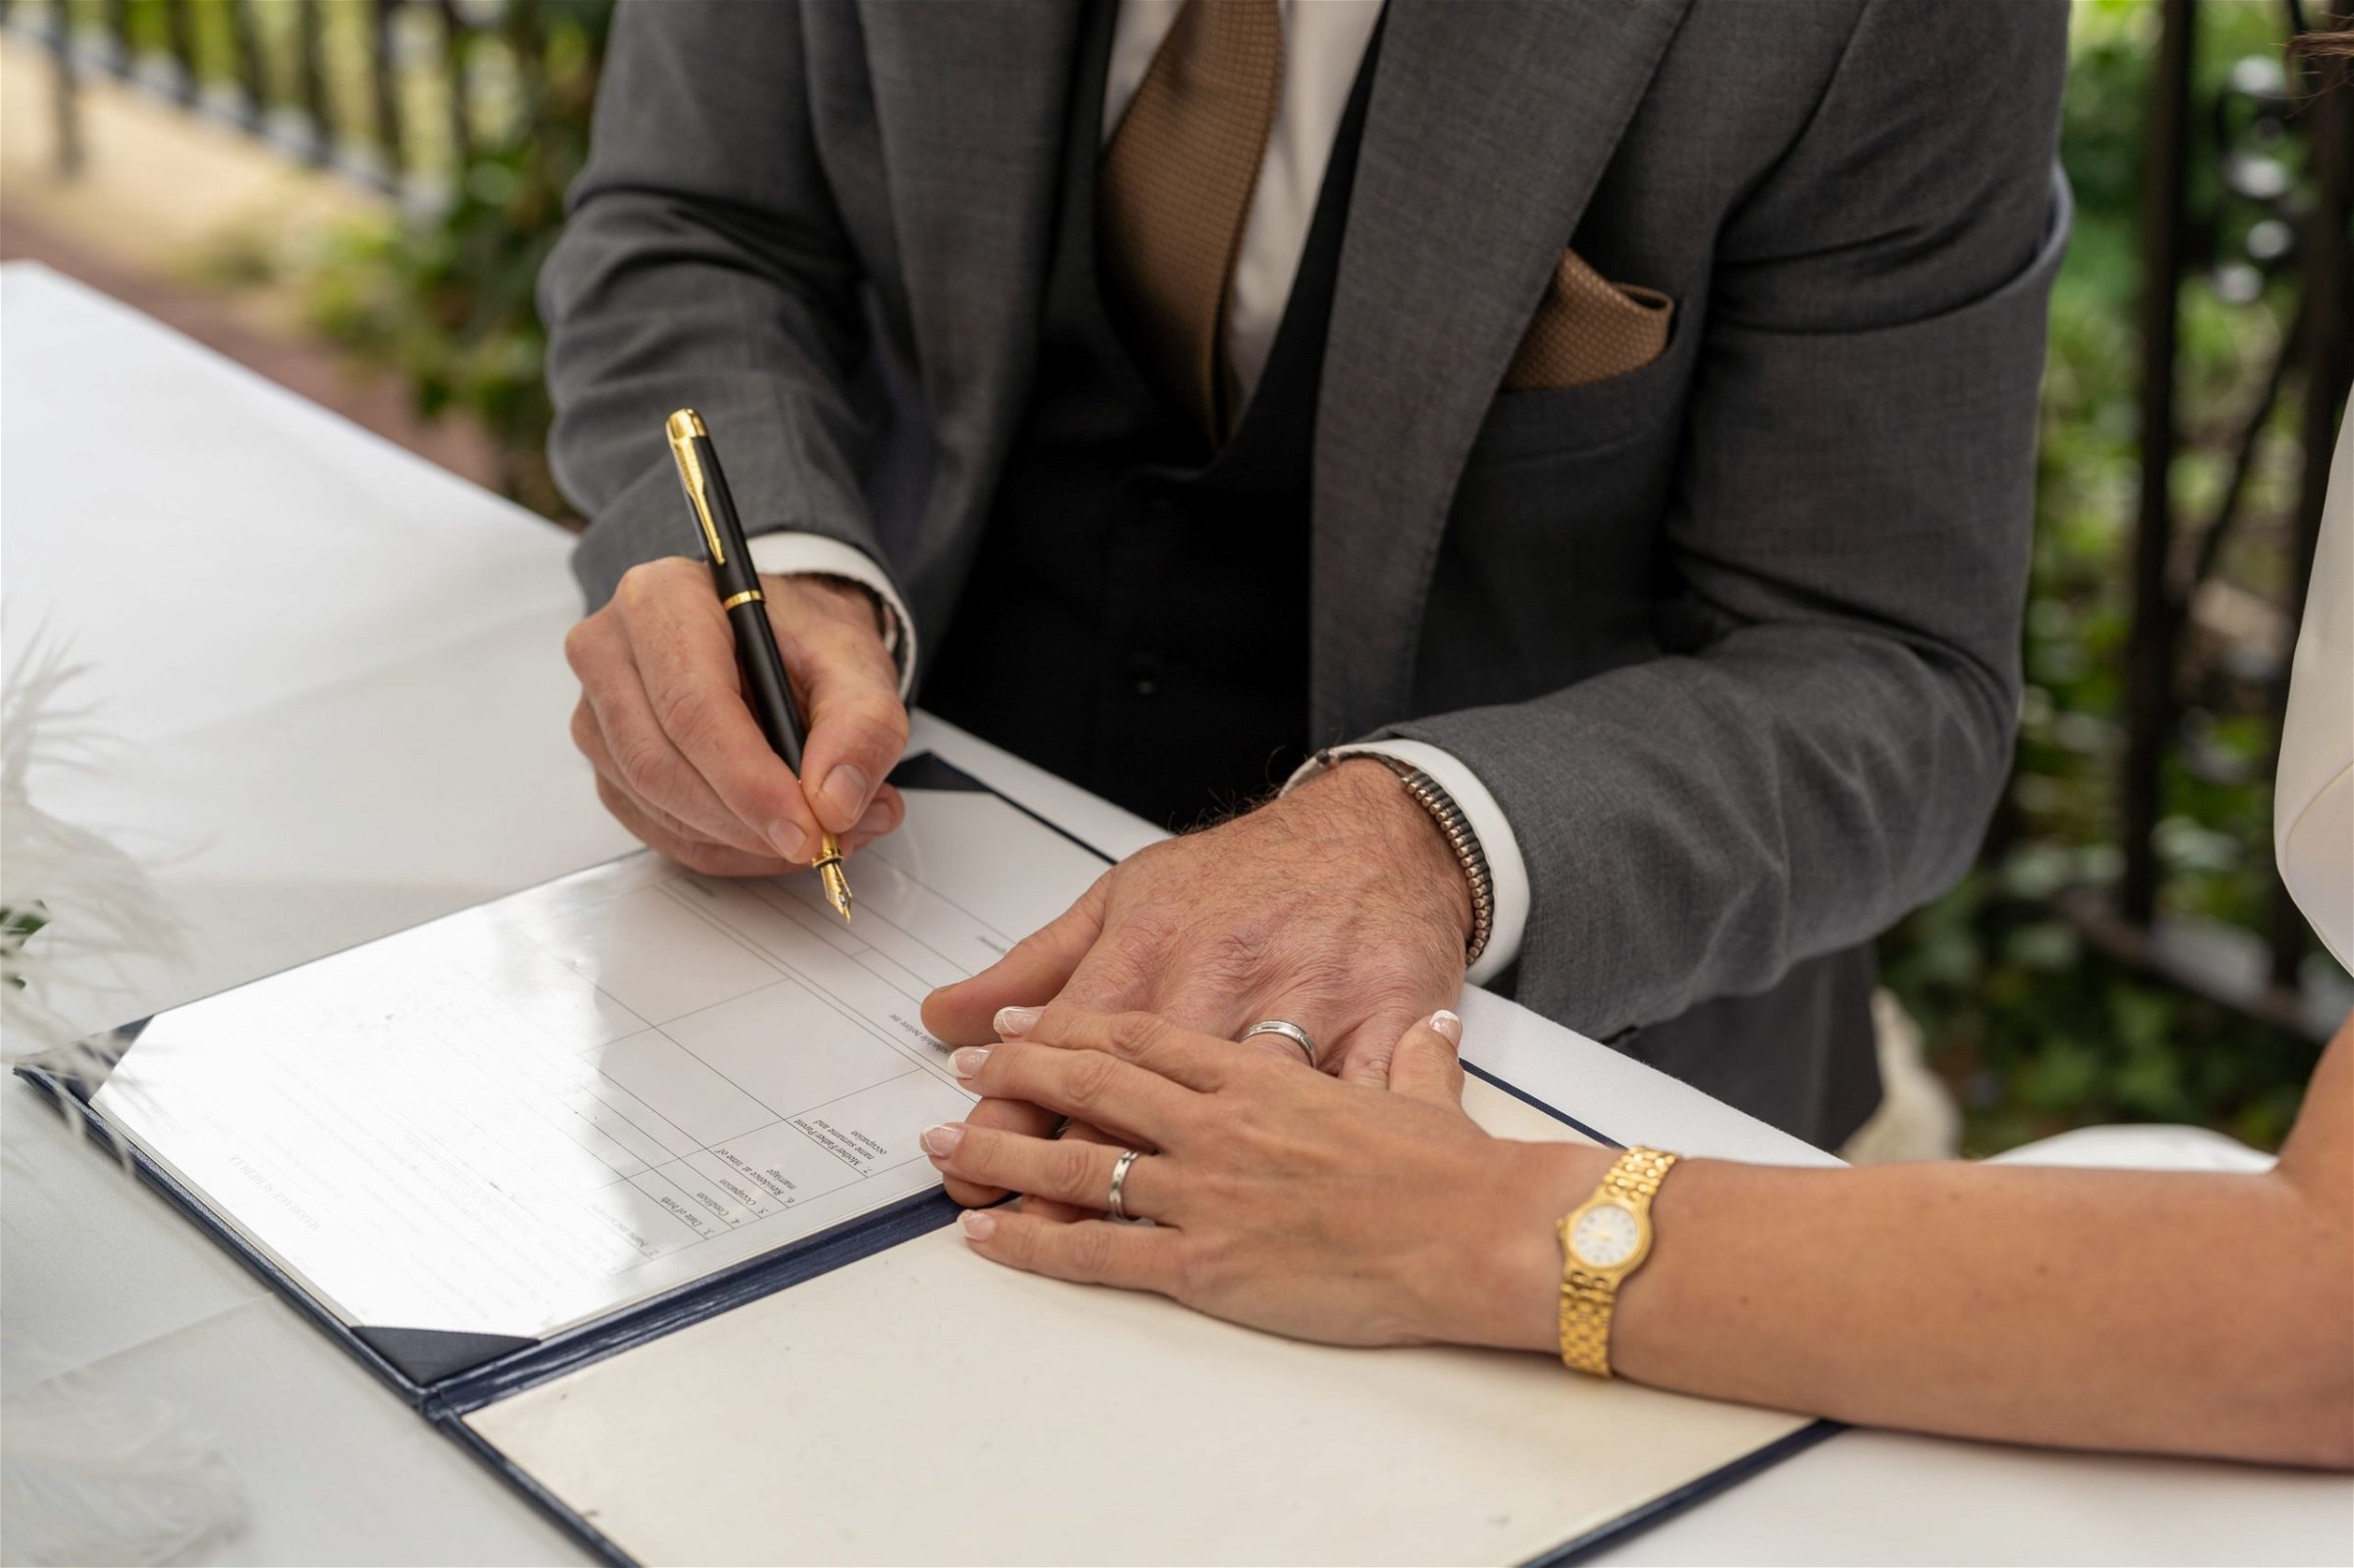 If you are engaged to be married or plan to be in the near future, it’s important to consider whether a prenuptial agreement is right for you.